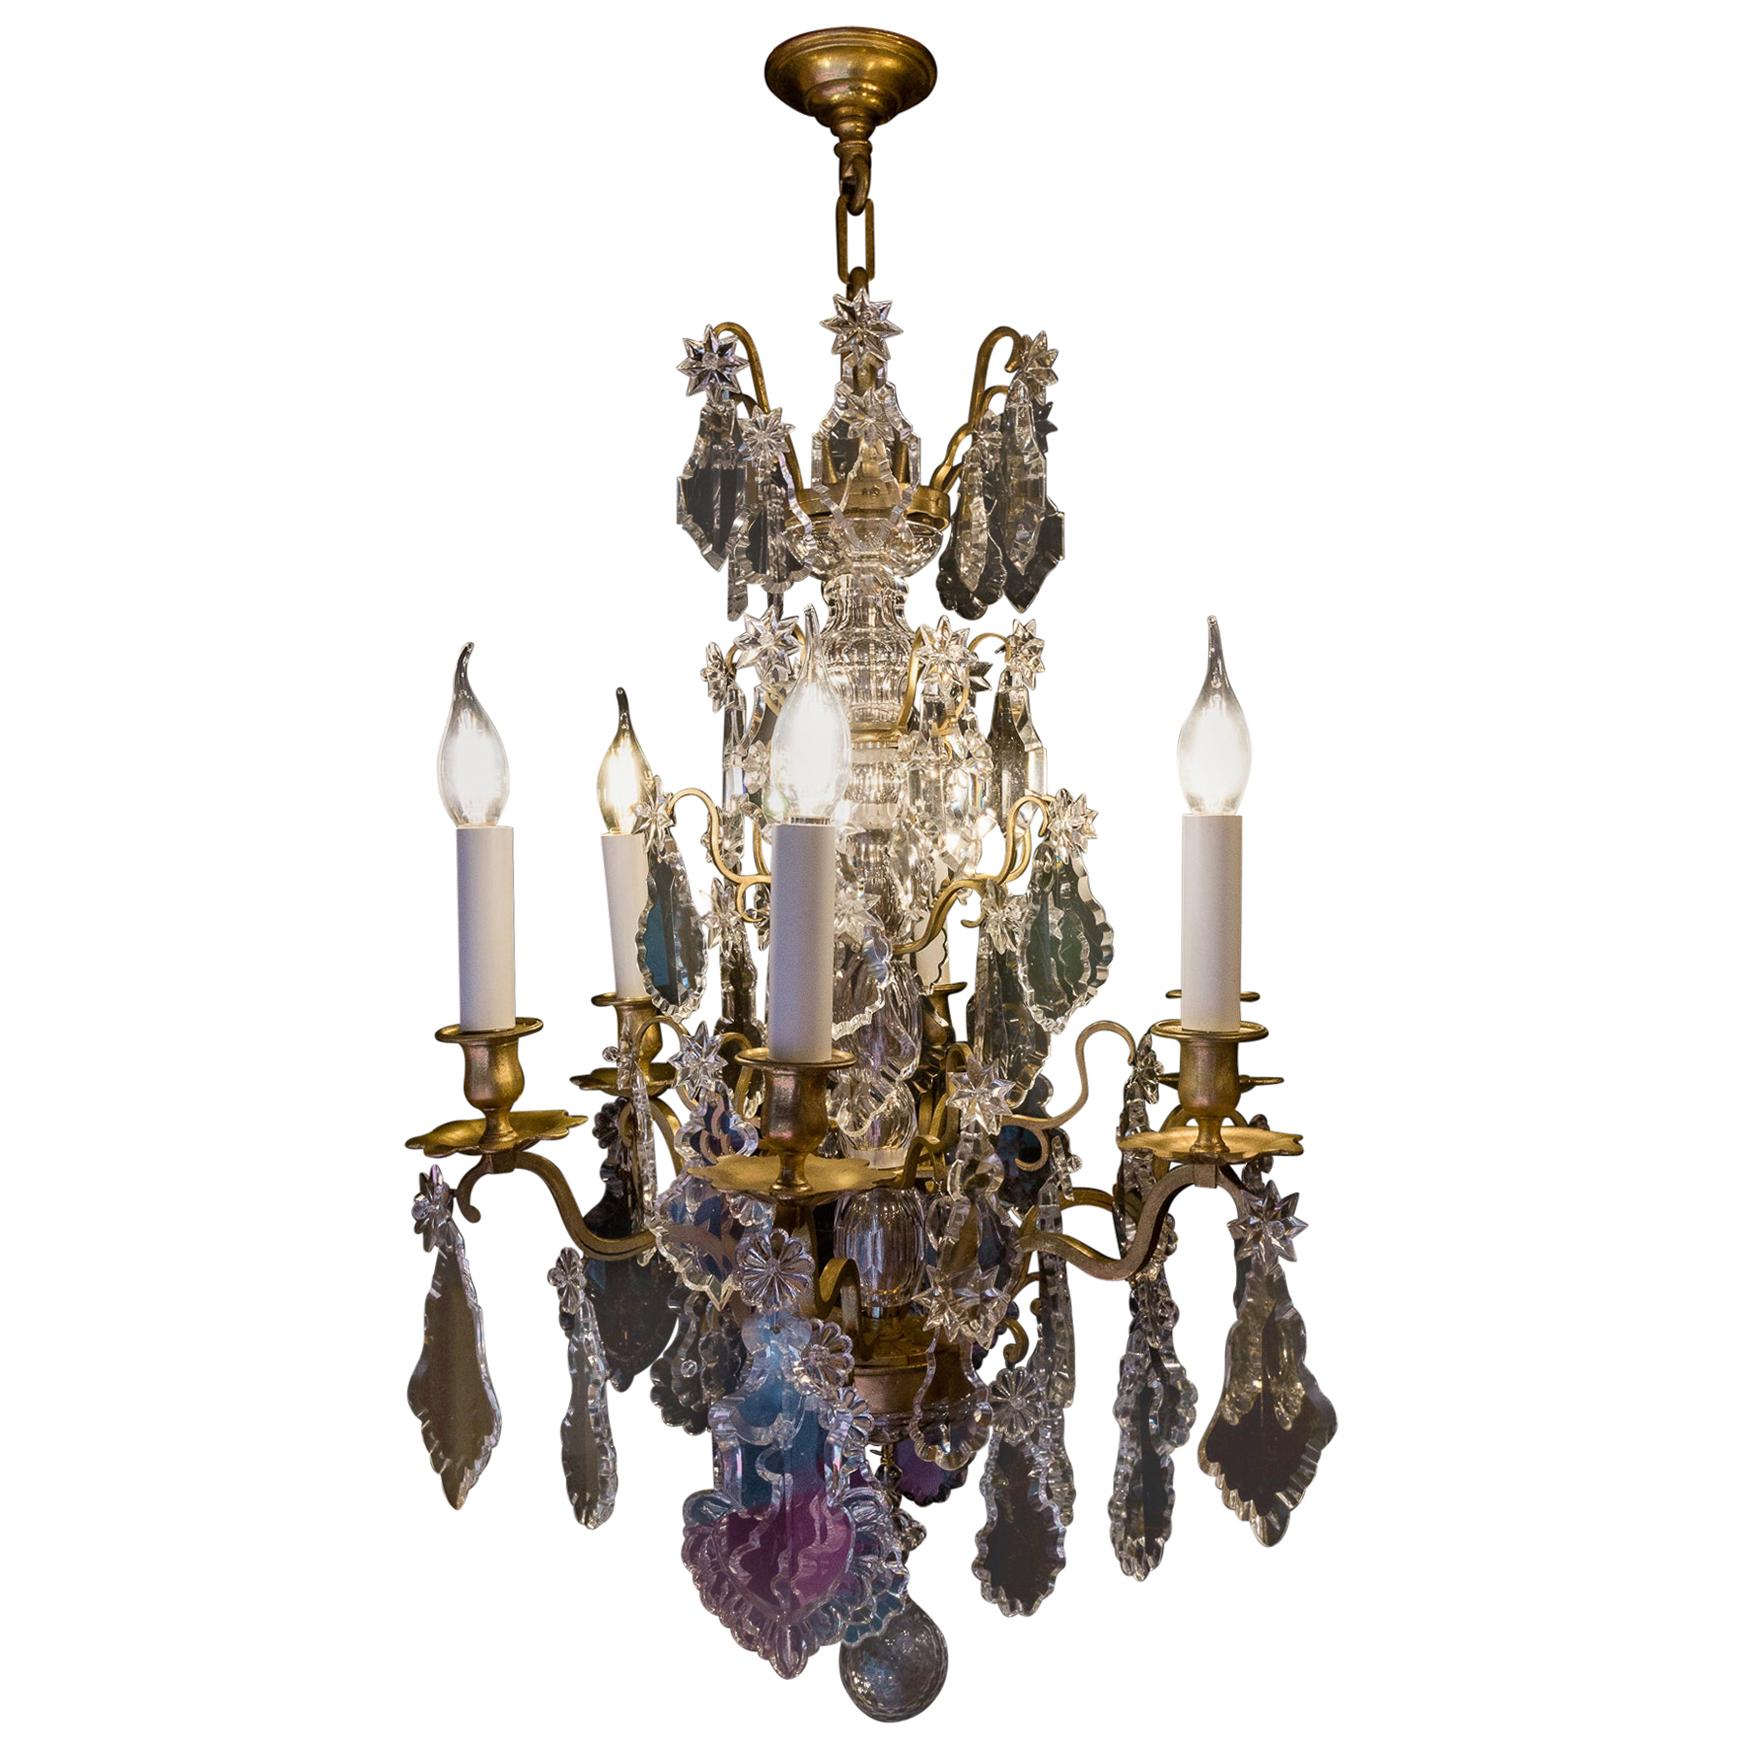 French Louis XVI Style Gilt-Bronze and Baccarat Crystal Chandelier, circa 1880